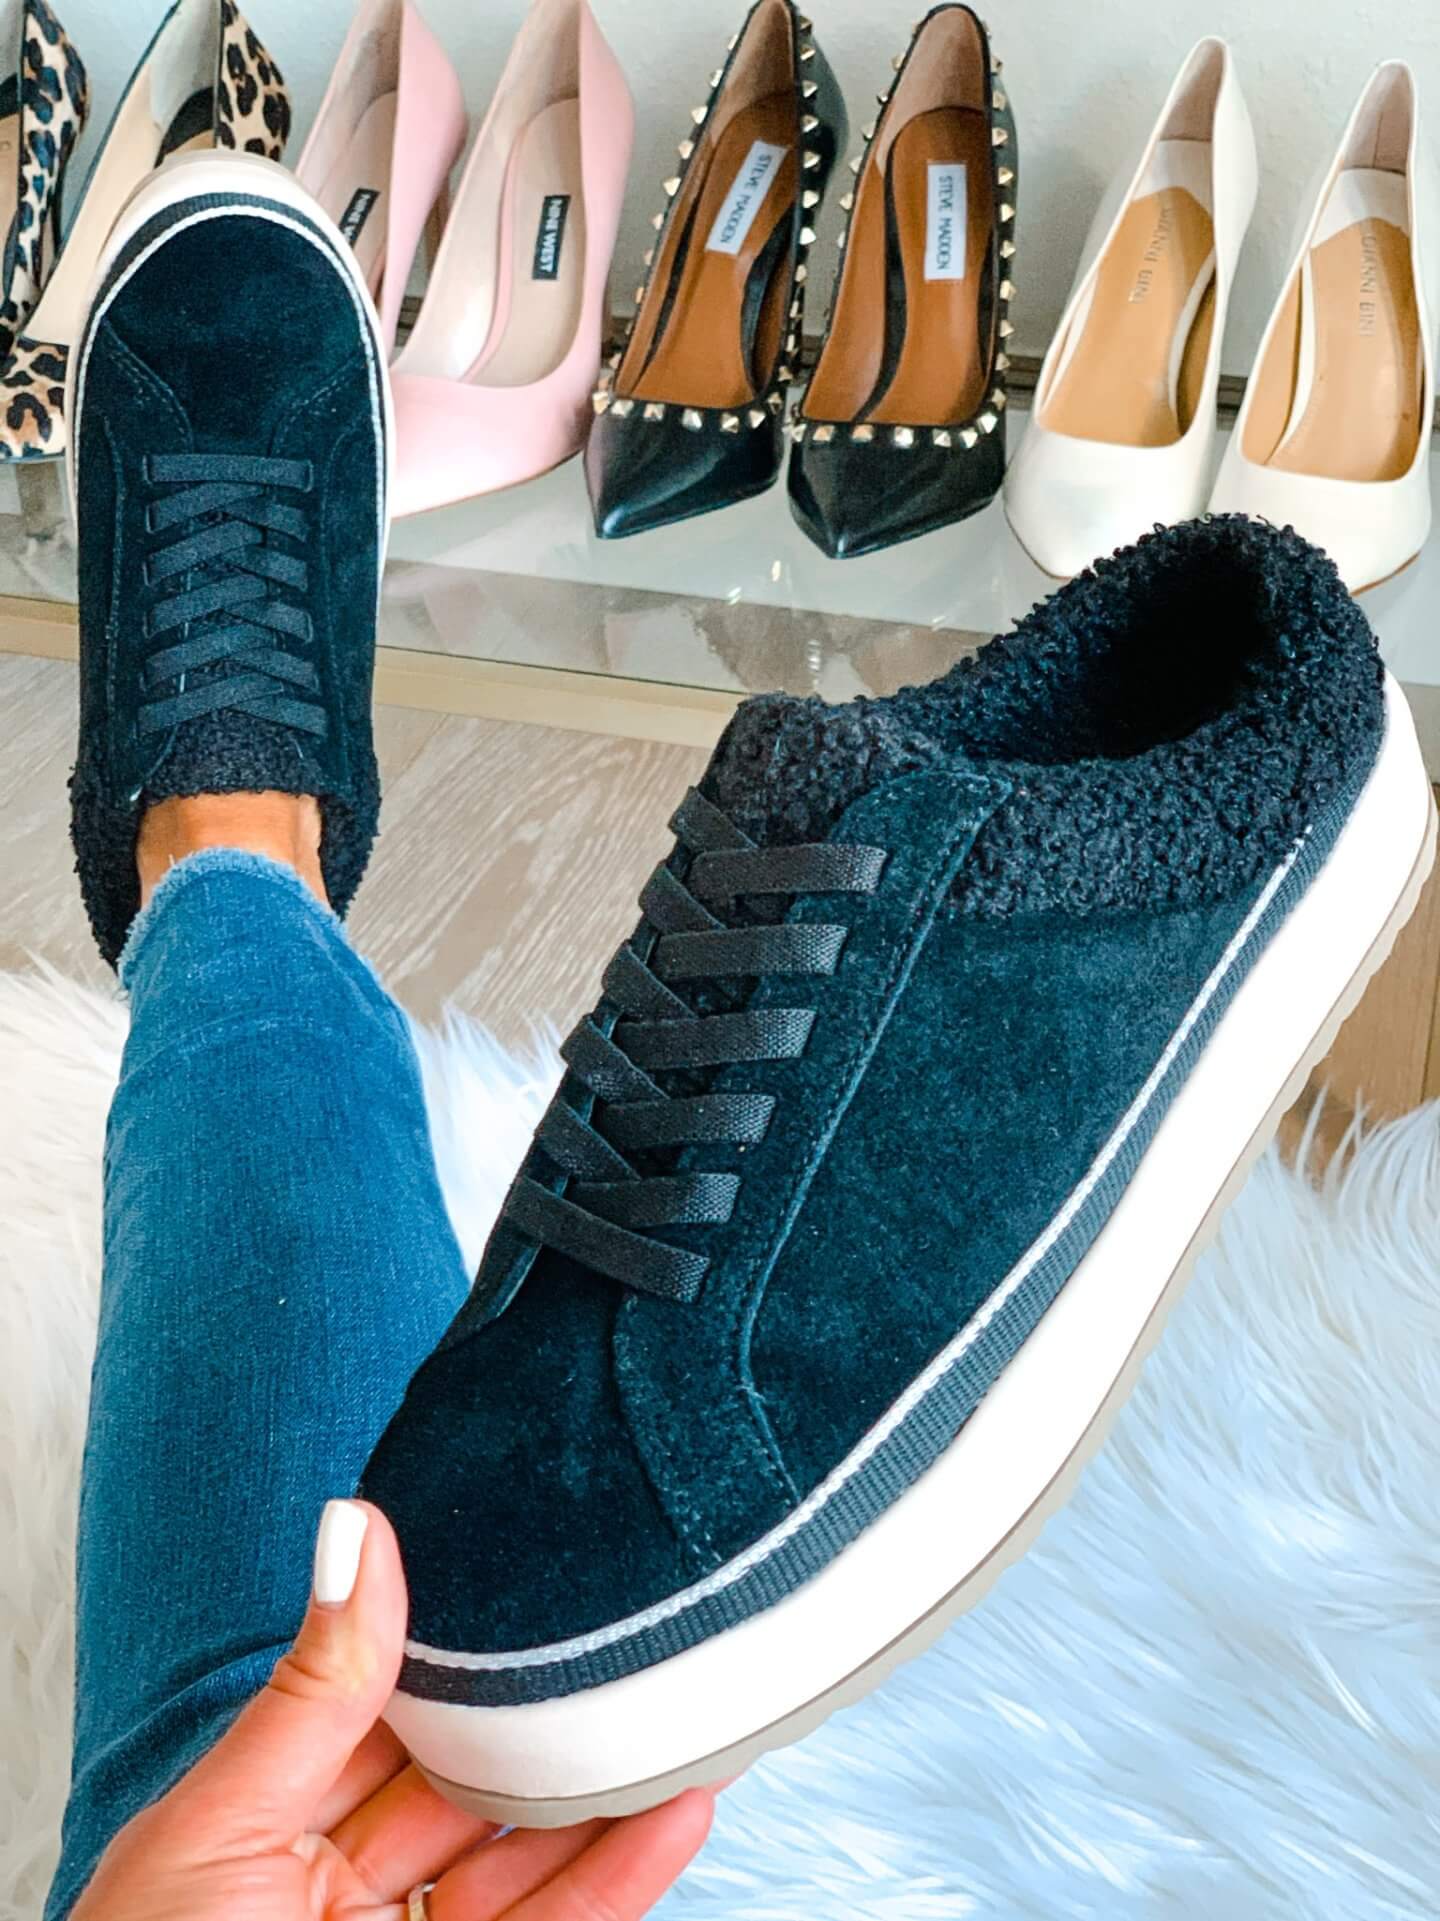 New Shoes For 2022 Review + Giveaway! - The Double Take Girls